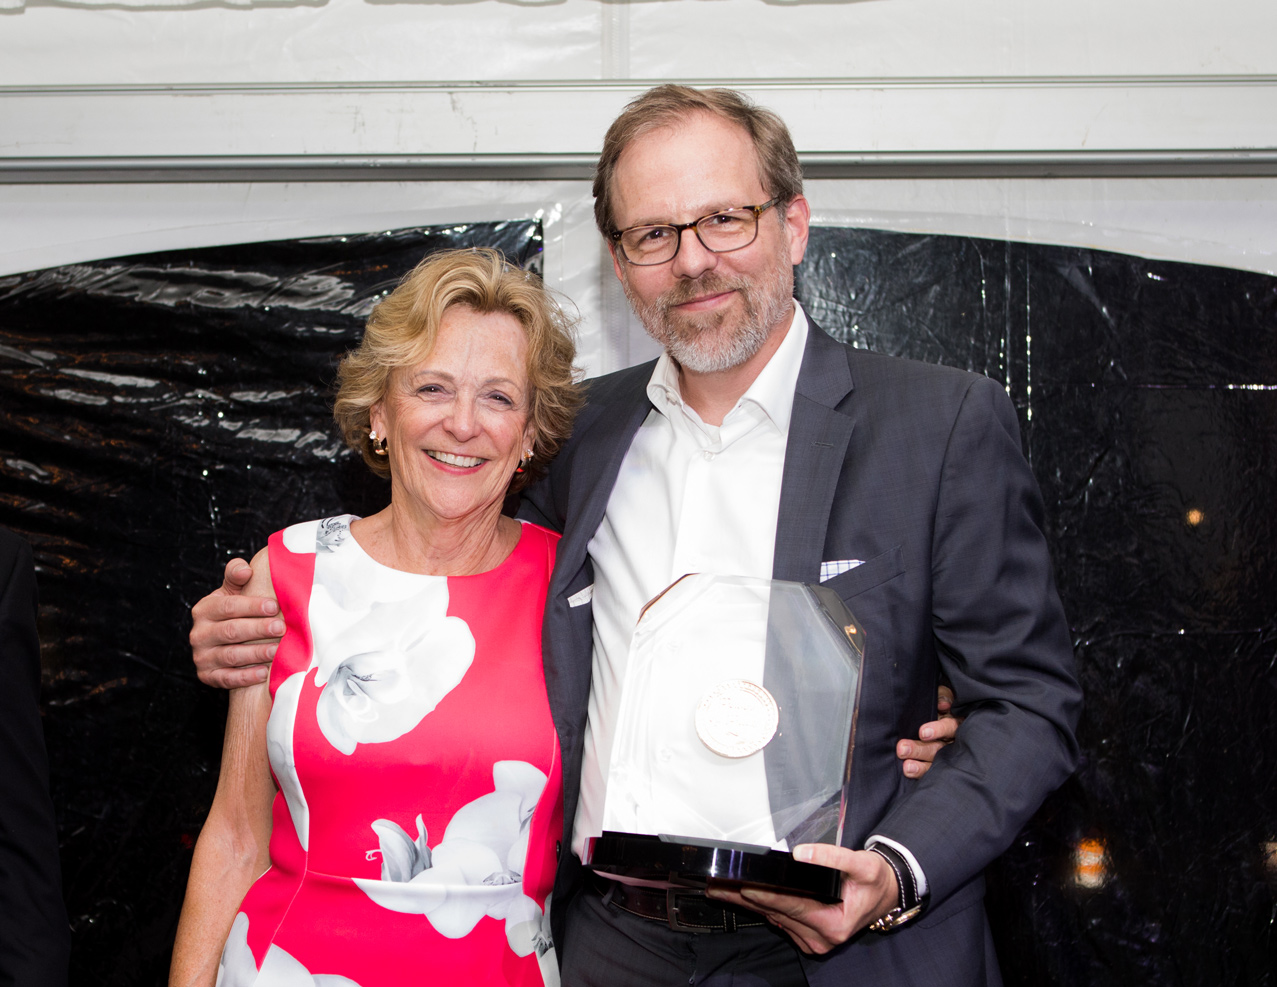 Charlotte Cooper, Neographic's Person of the Year, with Scott Vaughn